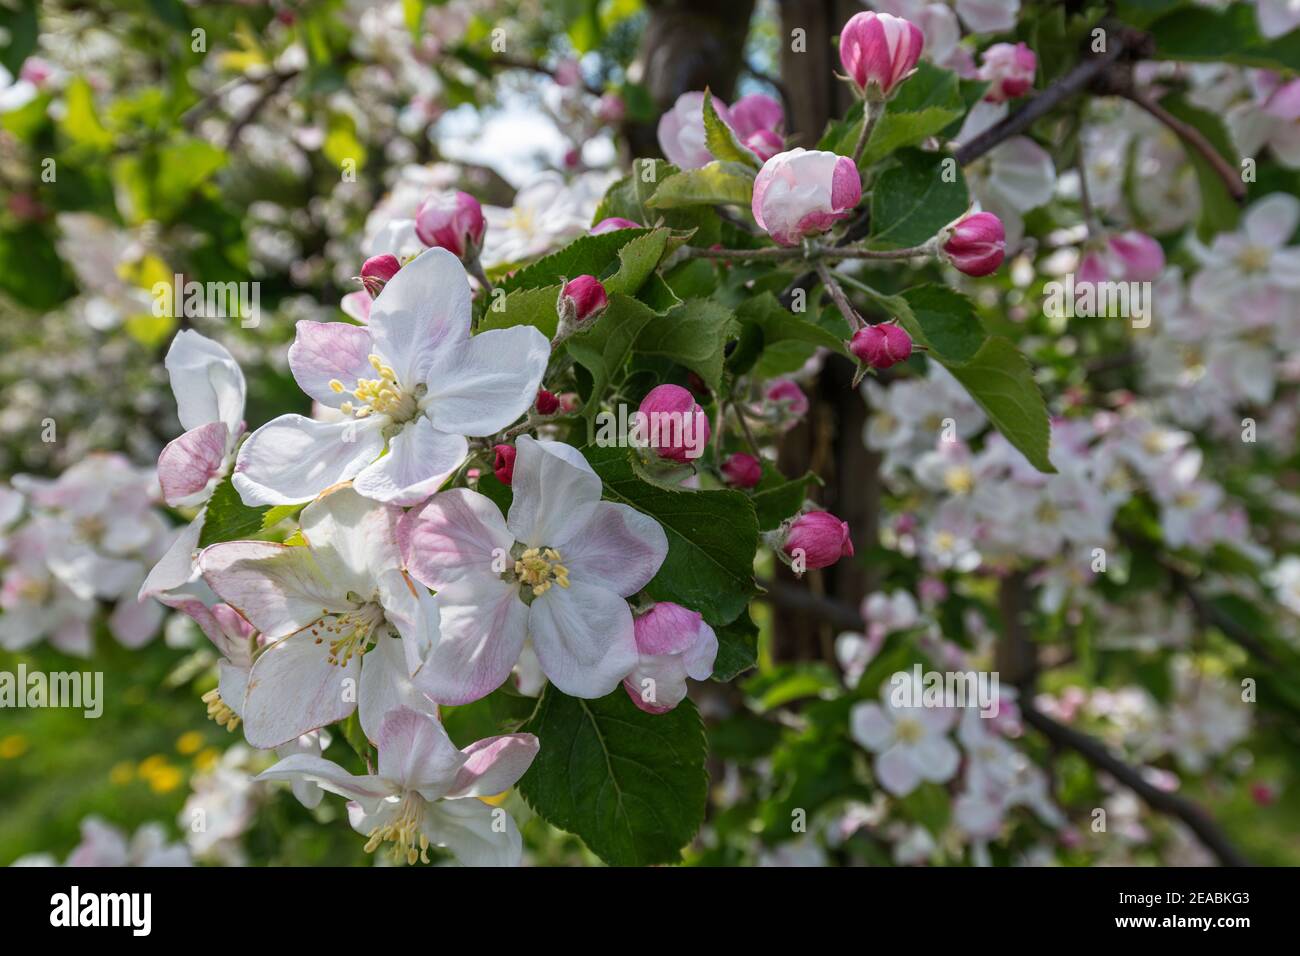 Blossoms, buds, apple blossom, close, blur, at Steinkirchen, Old Country, Stade district, Lower Saxony, Stock Photo